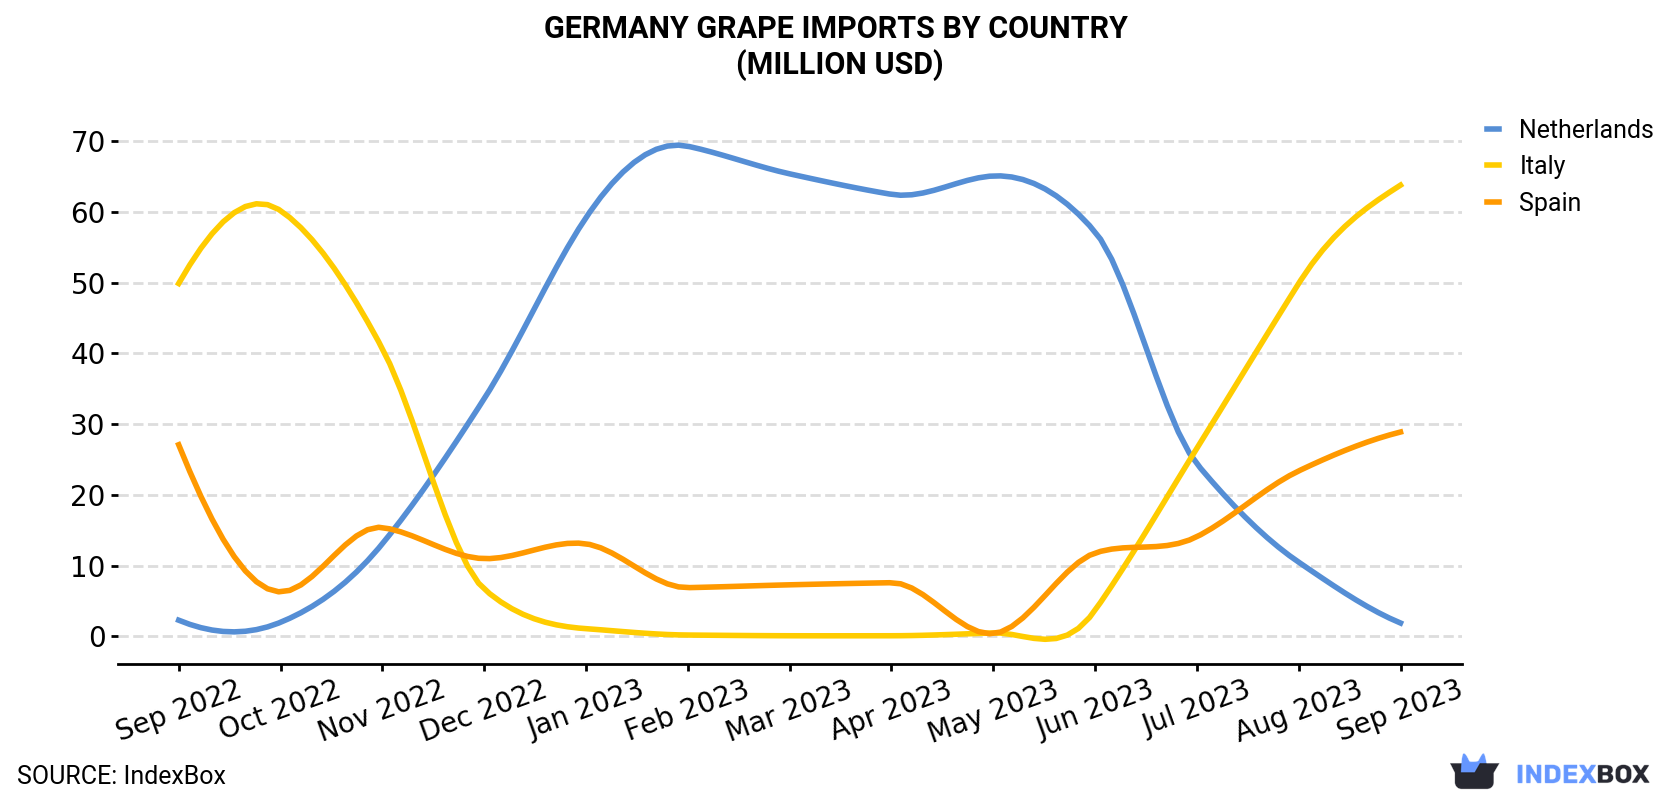 Germany Grape Imports By Country (Million USD)